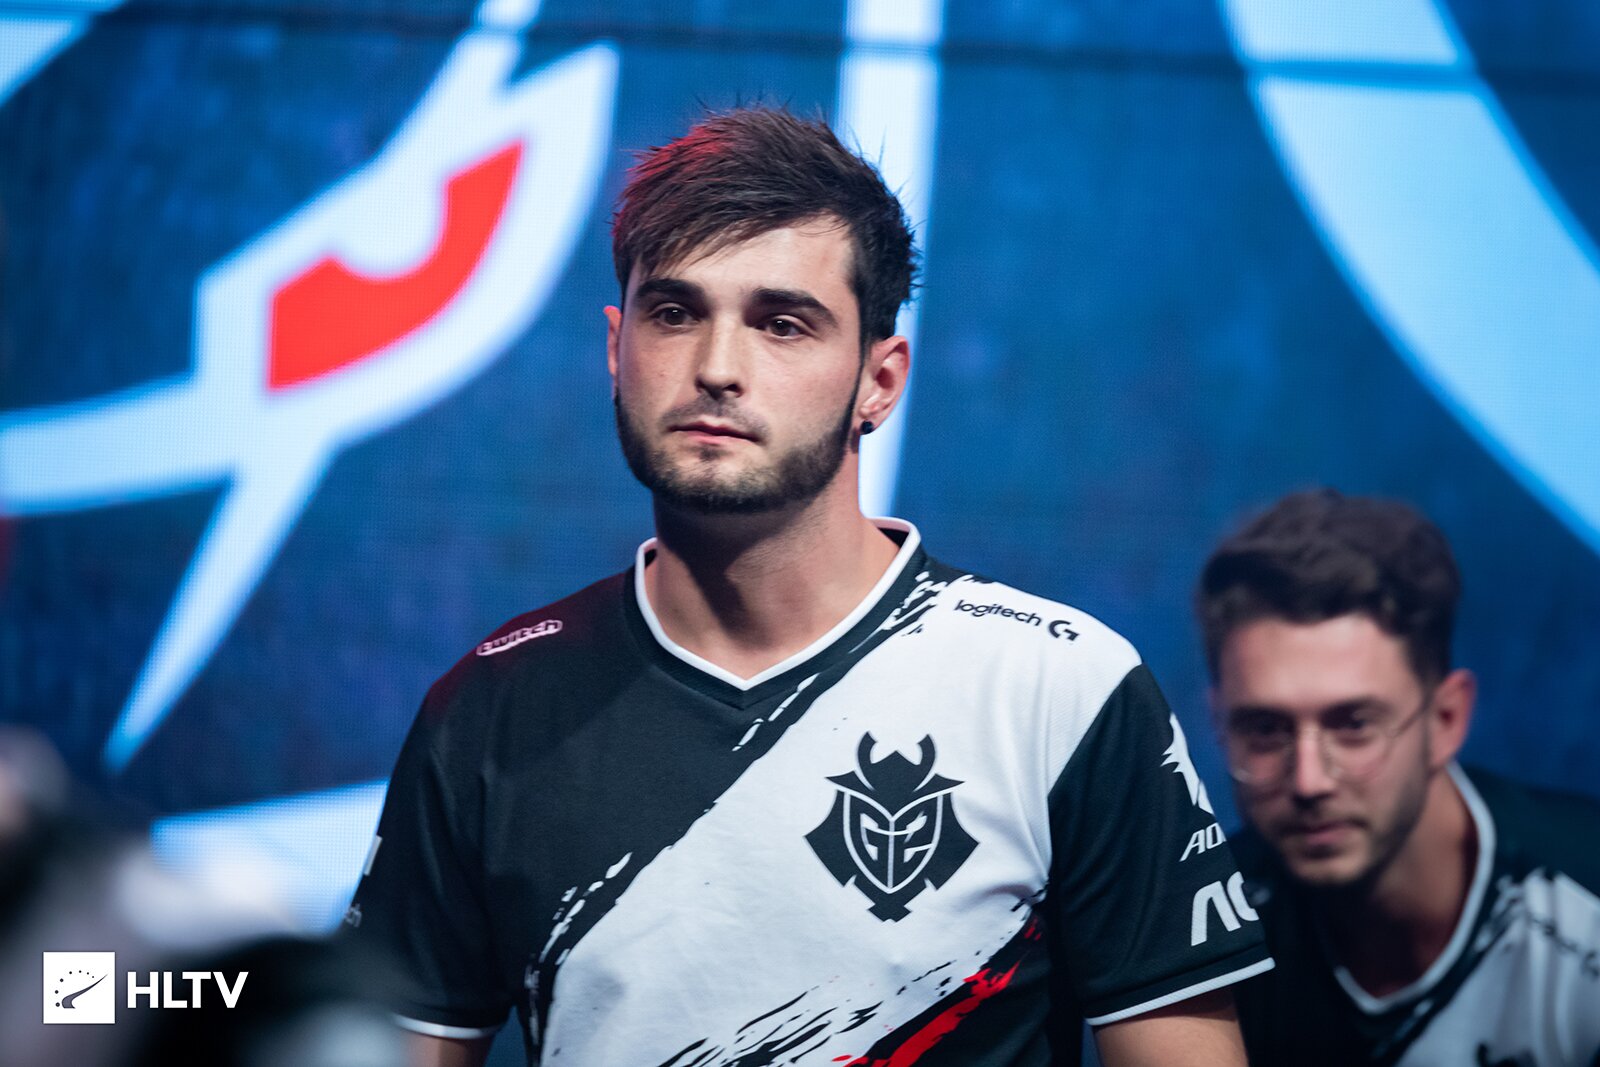 G2 Esports announced today that through a mutual decision, they have parted ways with CS:GO player shox (Photo via HLTV)